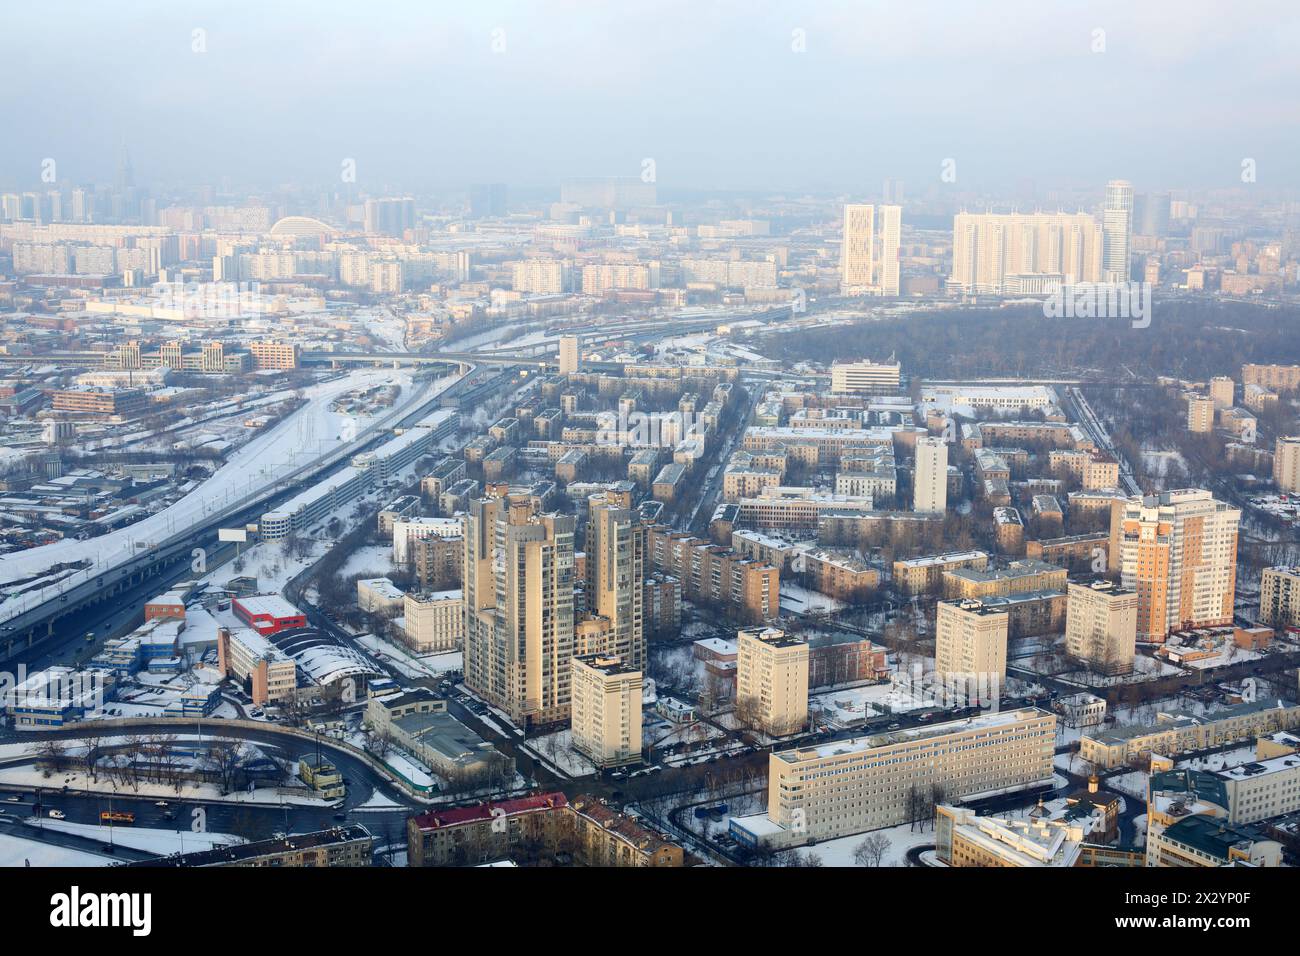 MOSCOW - JAN 2: View from Moscow City on the Presnensky district in the winter on January 2, 2013 in Moscow, Russia. Stock Photo